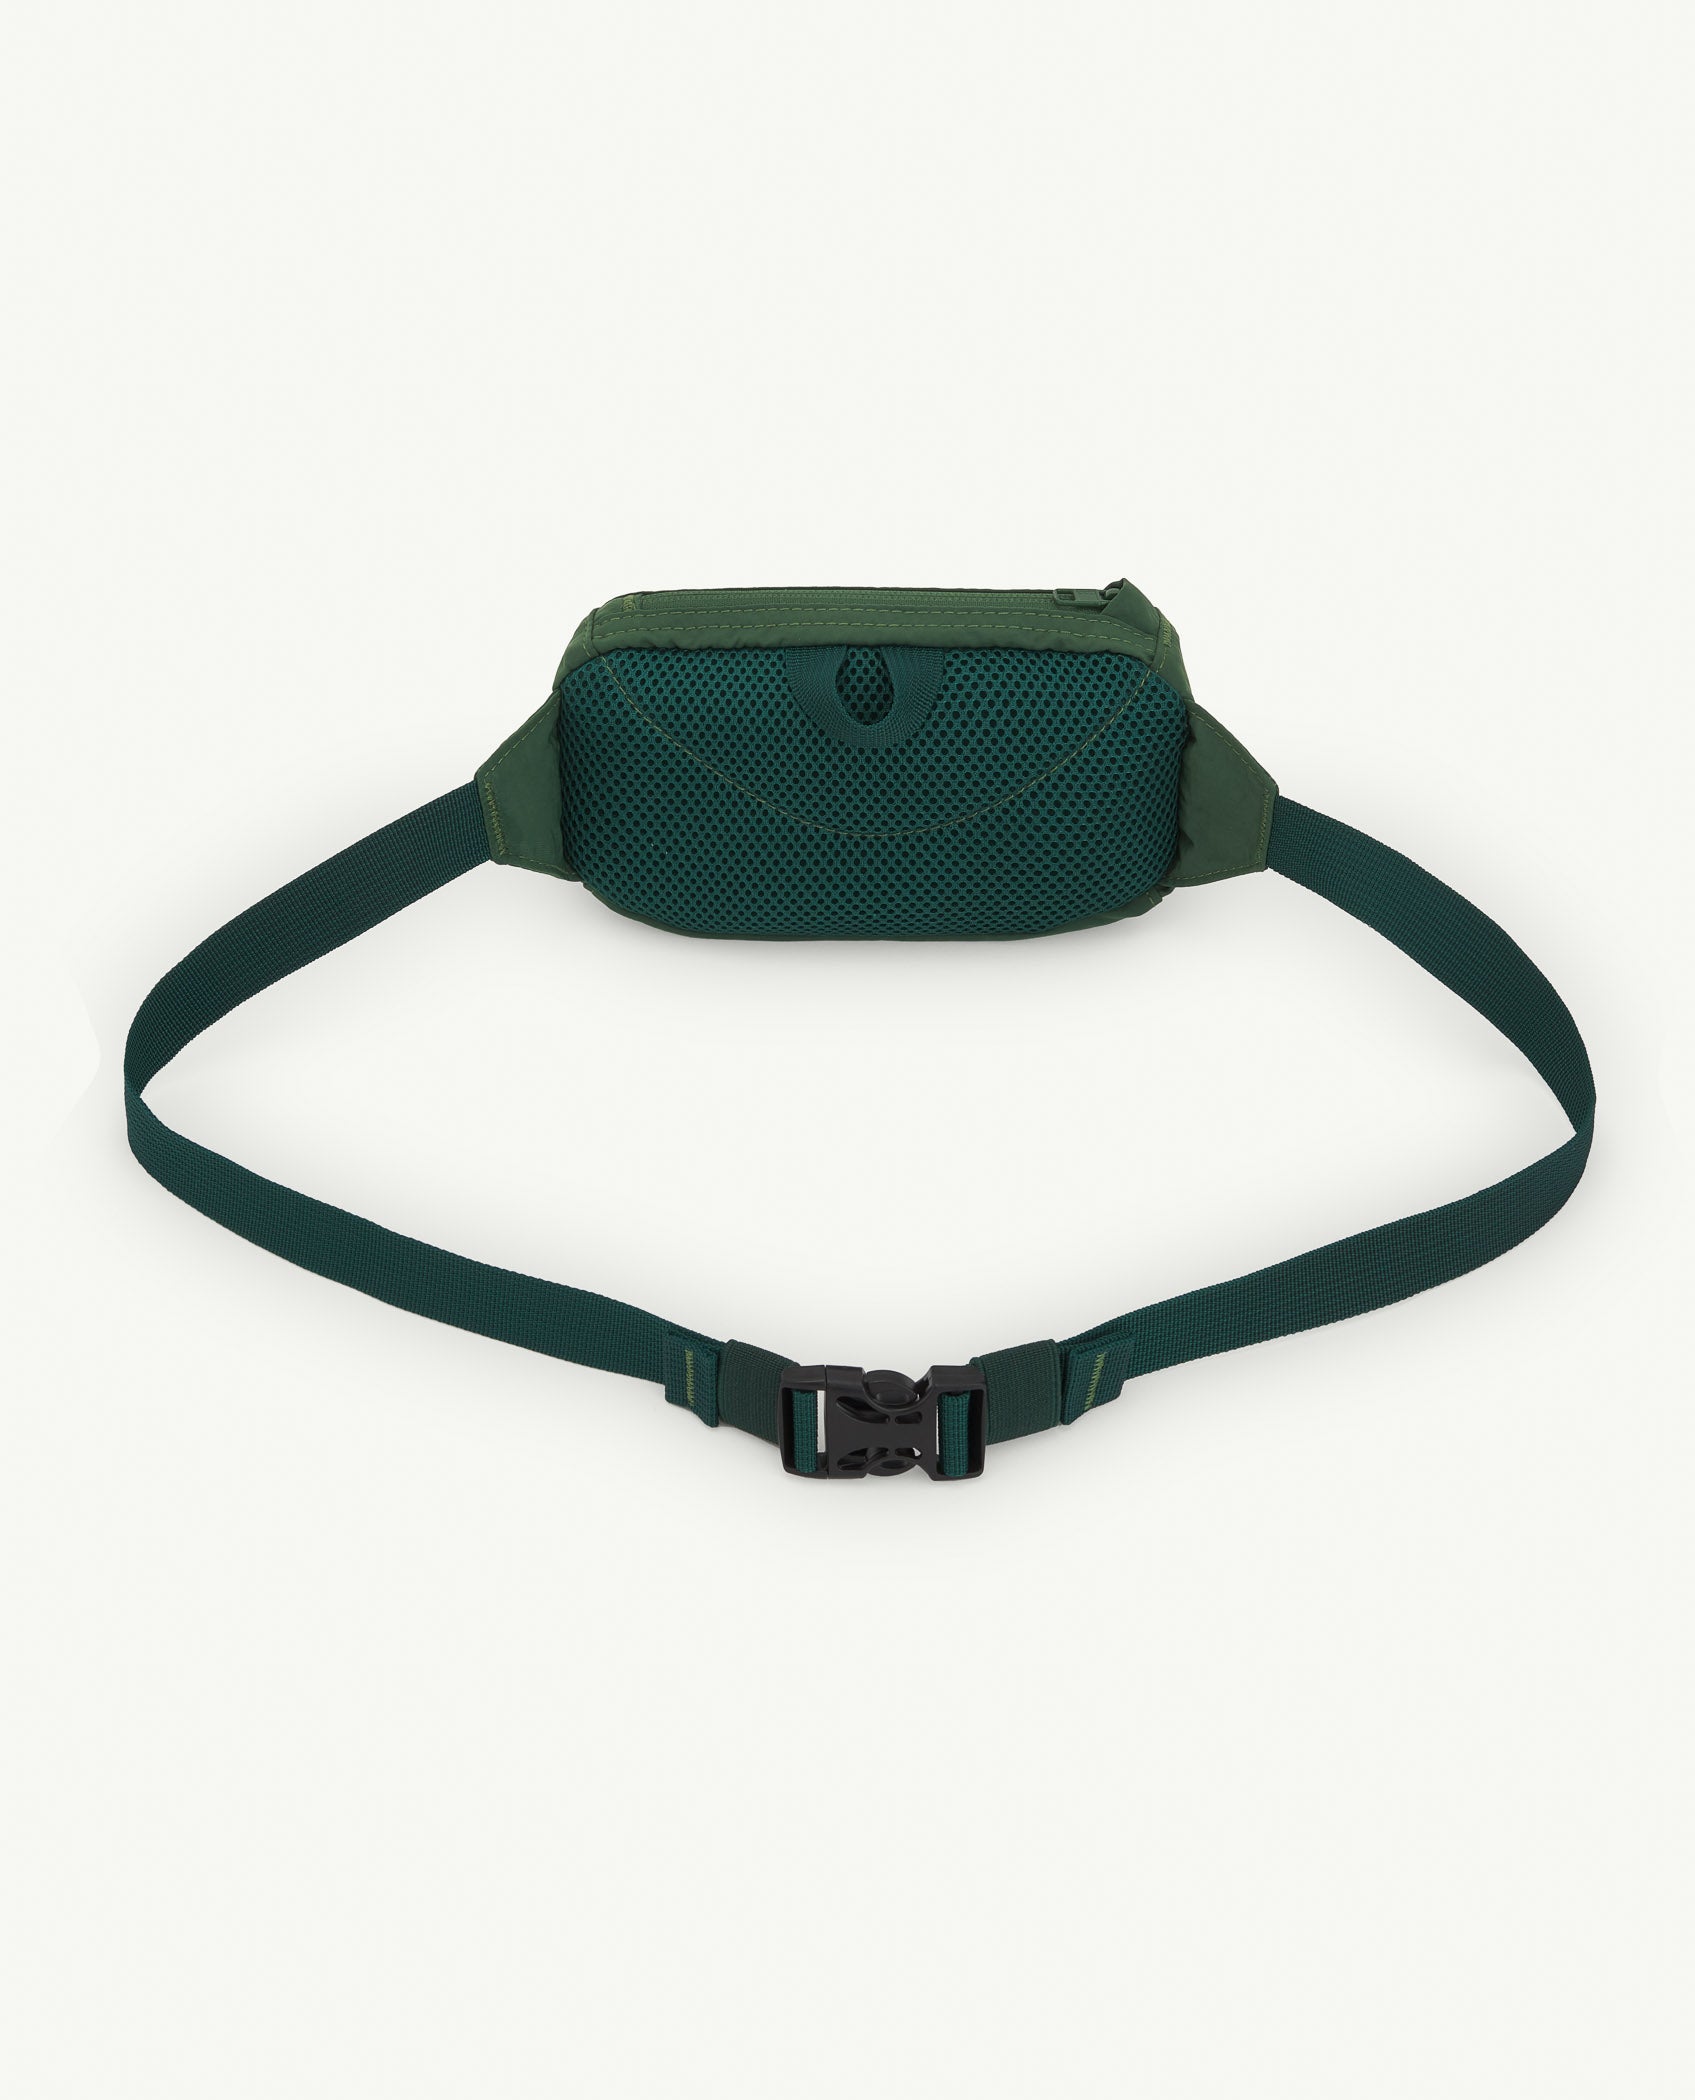 The Animals Observatory Fanny Pack Onesize Bag - Green